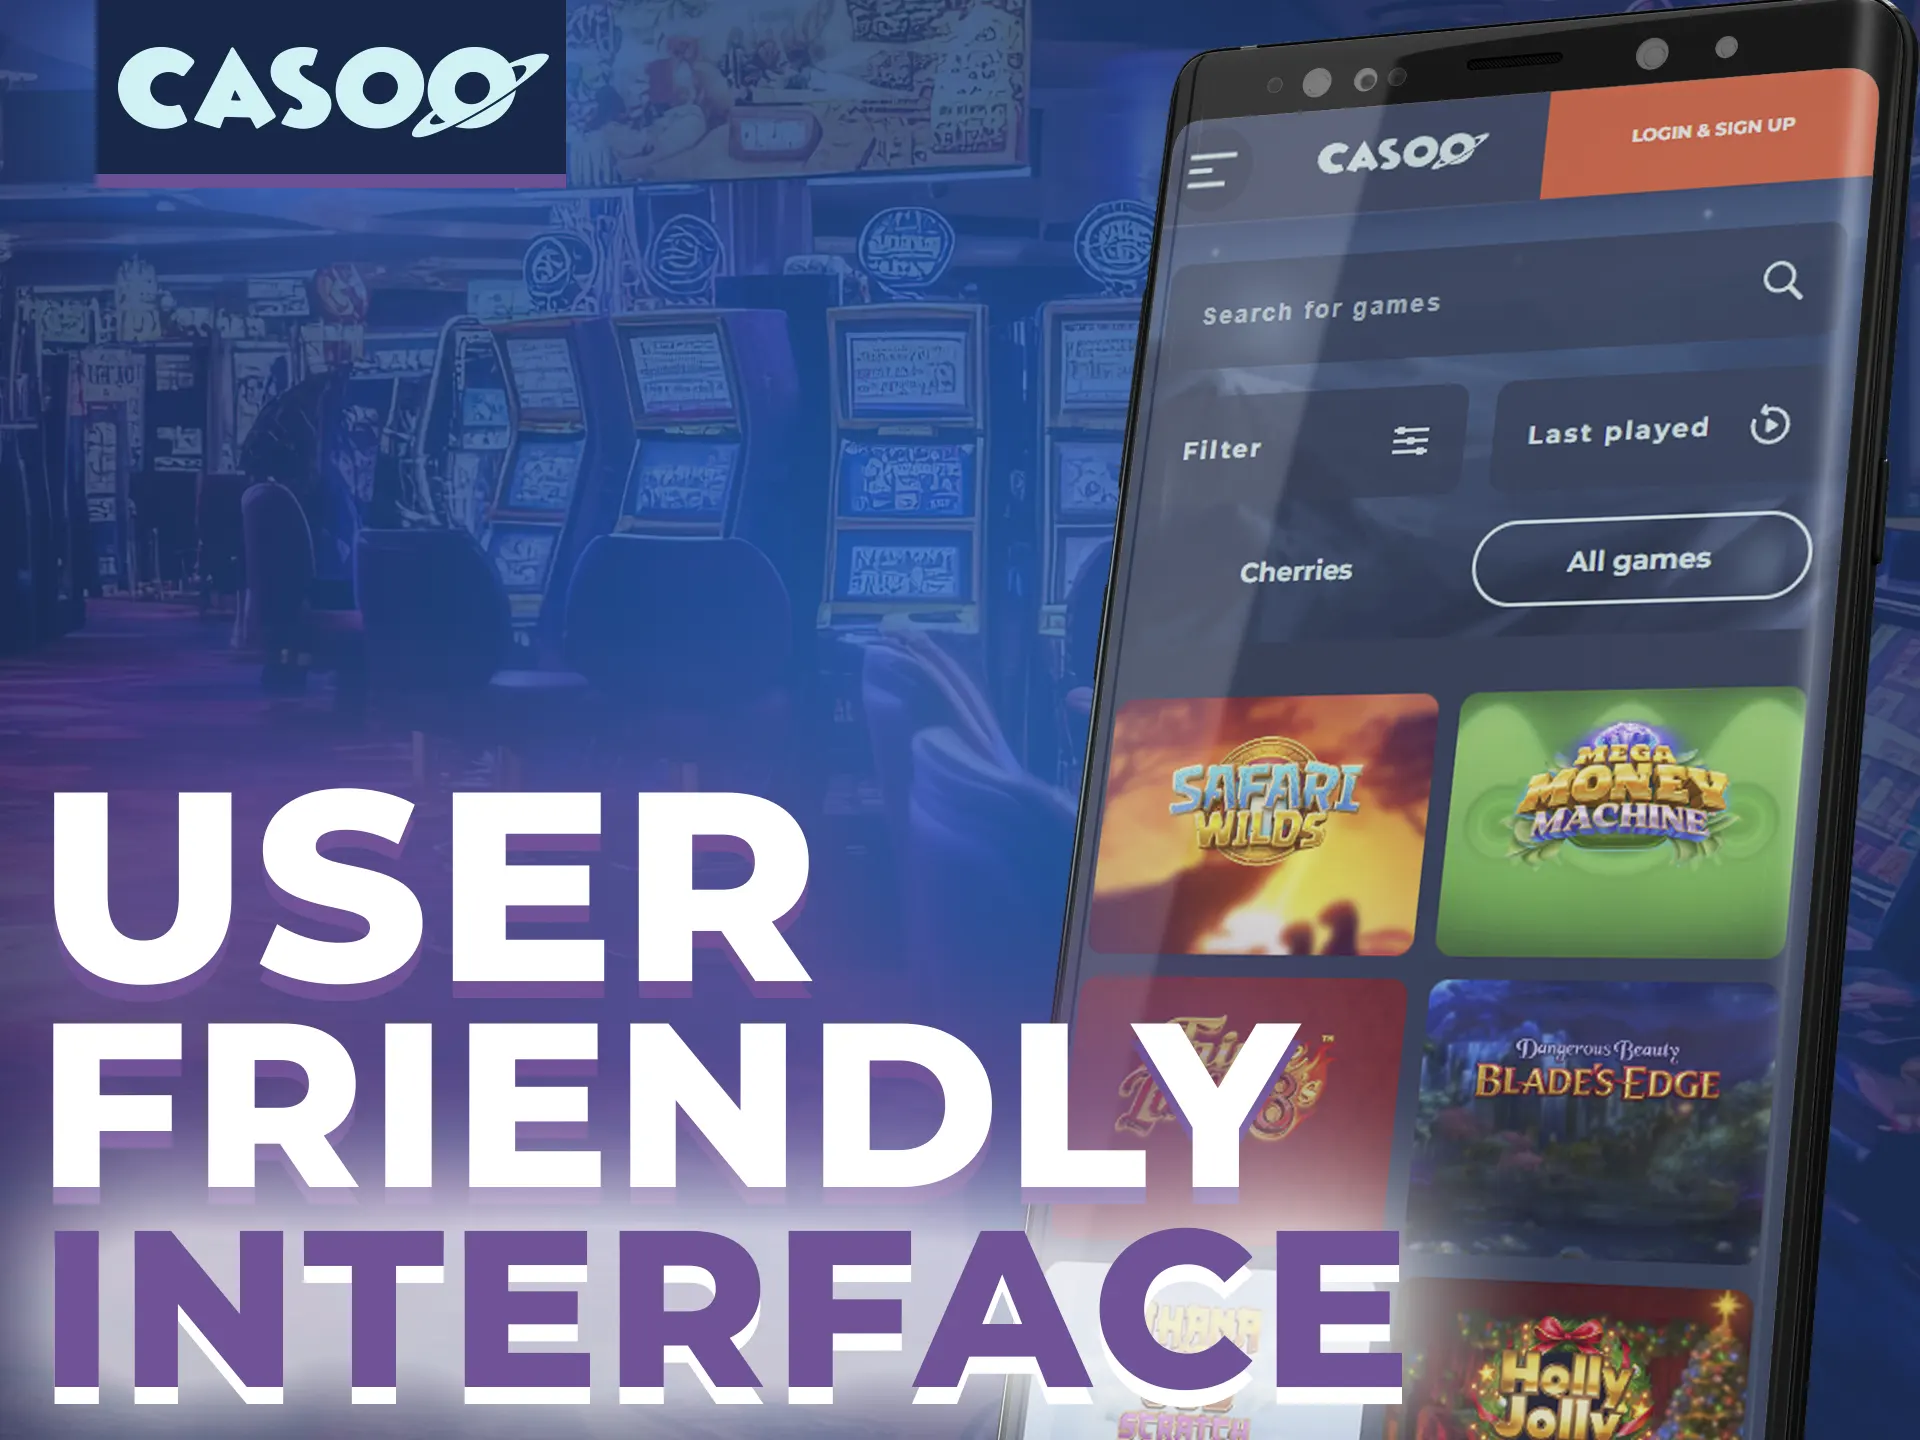 Enjoy user-friendly interface and experience at Casoo.